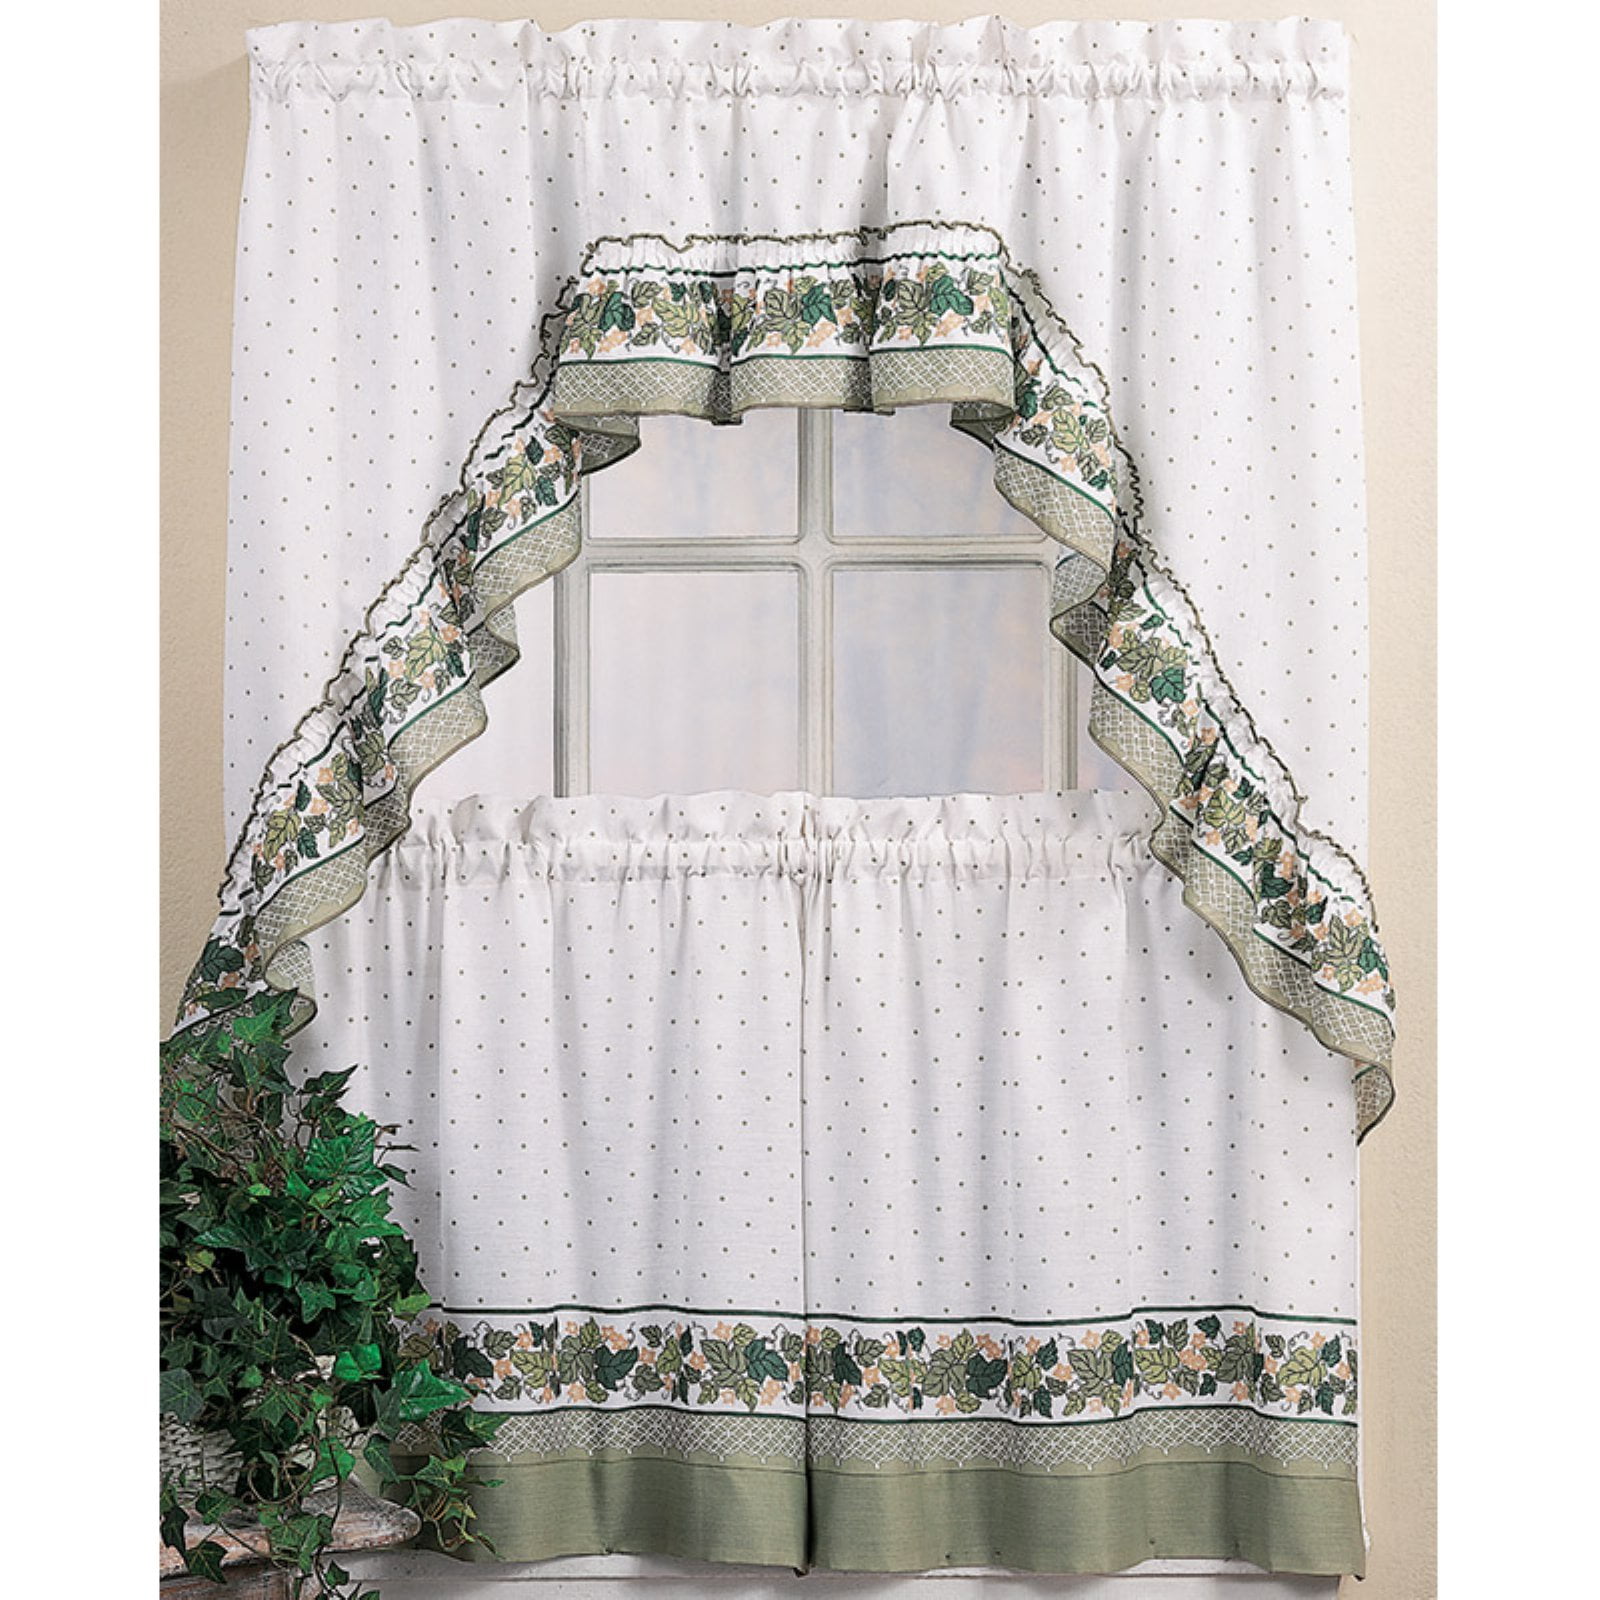 Pears & Grapes 3 Pc Kitchen Curtain Set Assorted Sizes Harvest Orchard Apples 